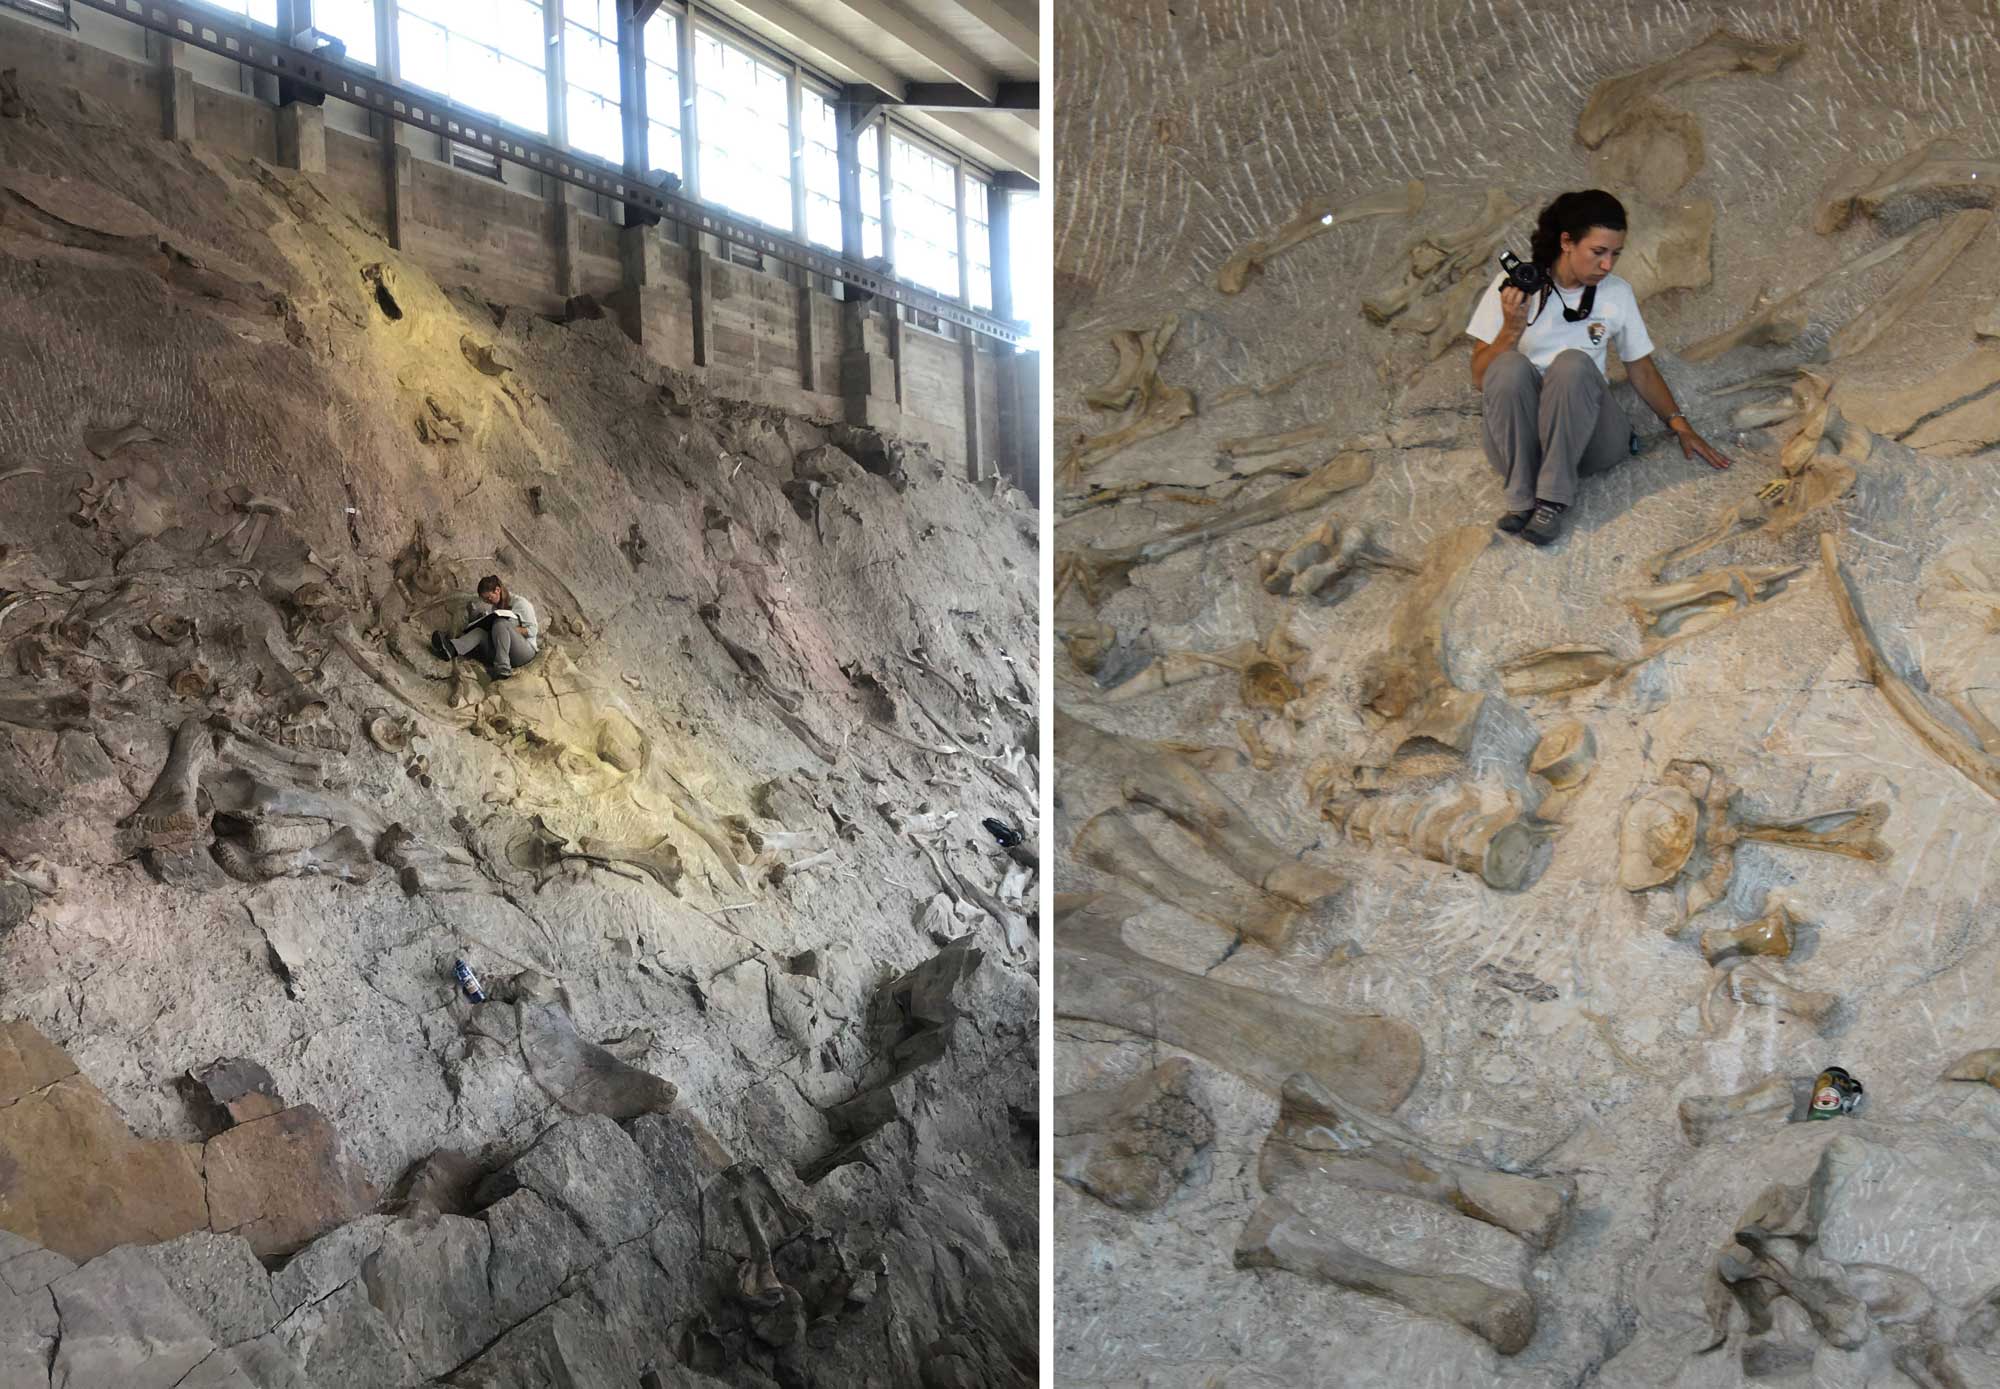 Two-panel figure showing the "Wall of Bones" at Dinosaur National Monument. The wall is a slanted rock wall with a jumble of dinosaur bones that have been exposed and left in place, where they can be viewed by visitors. Panel 1: A woman sits on the wall and appears to be taking notes. Panel 2: A woman sits on the wall with a camera strap around her neck; she is holding a large camera in her right hand..